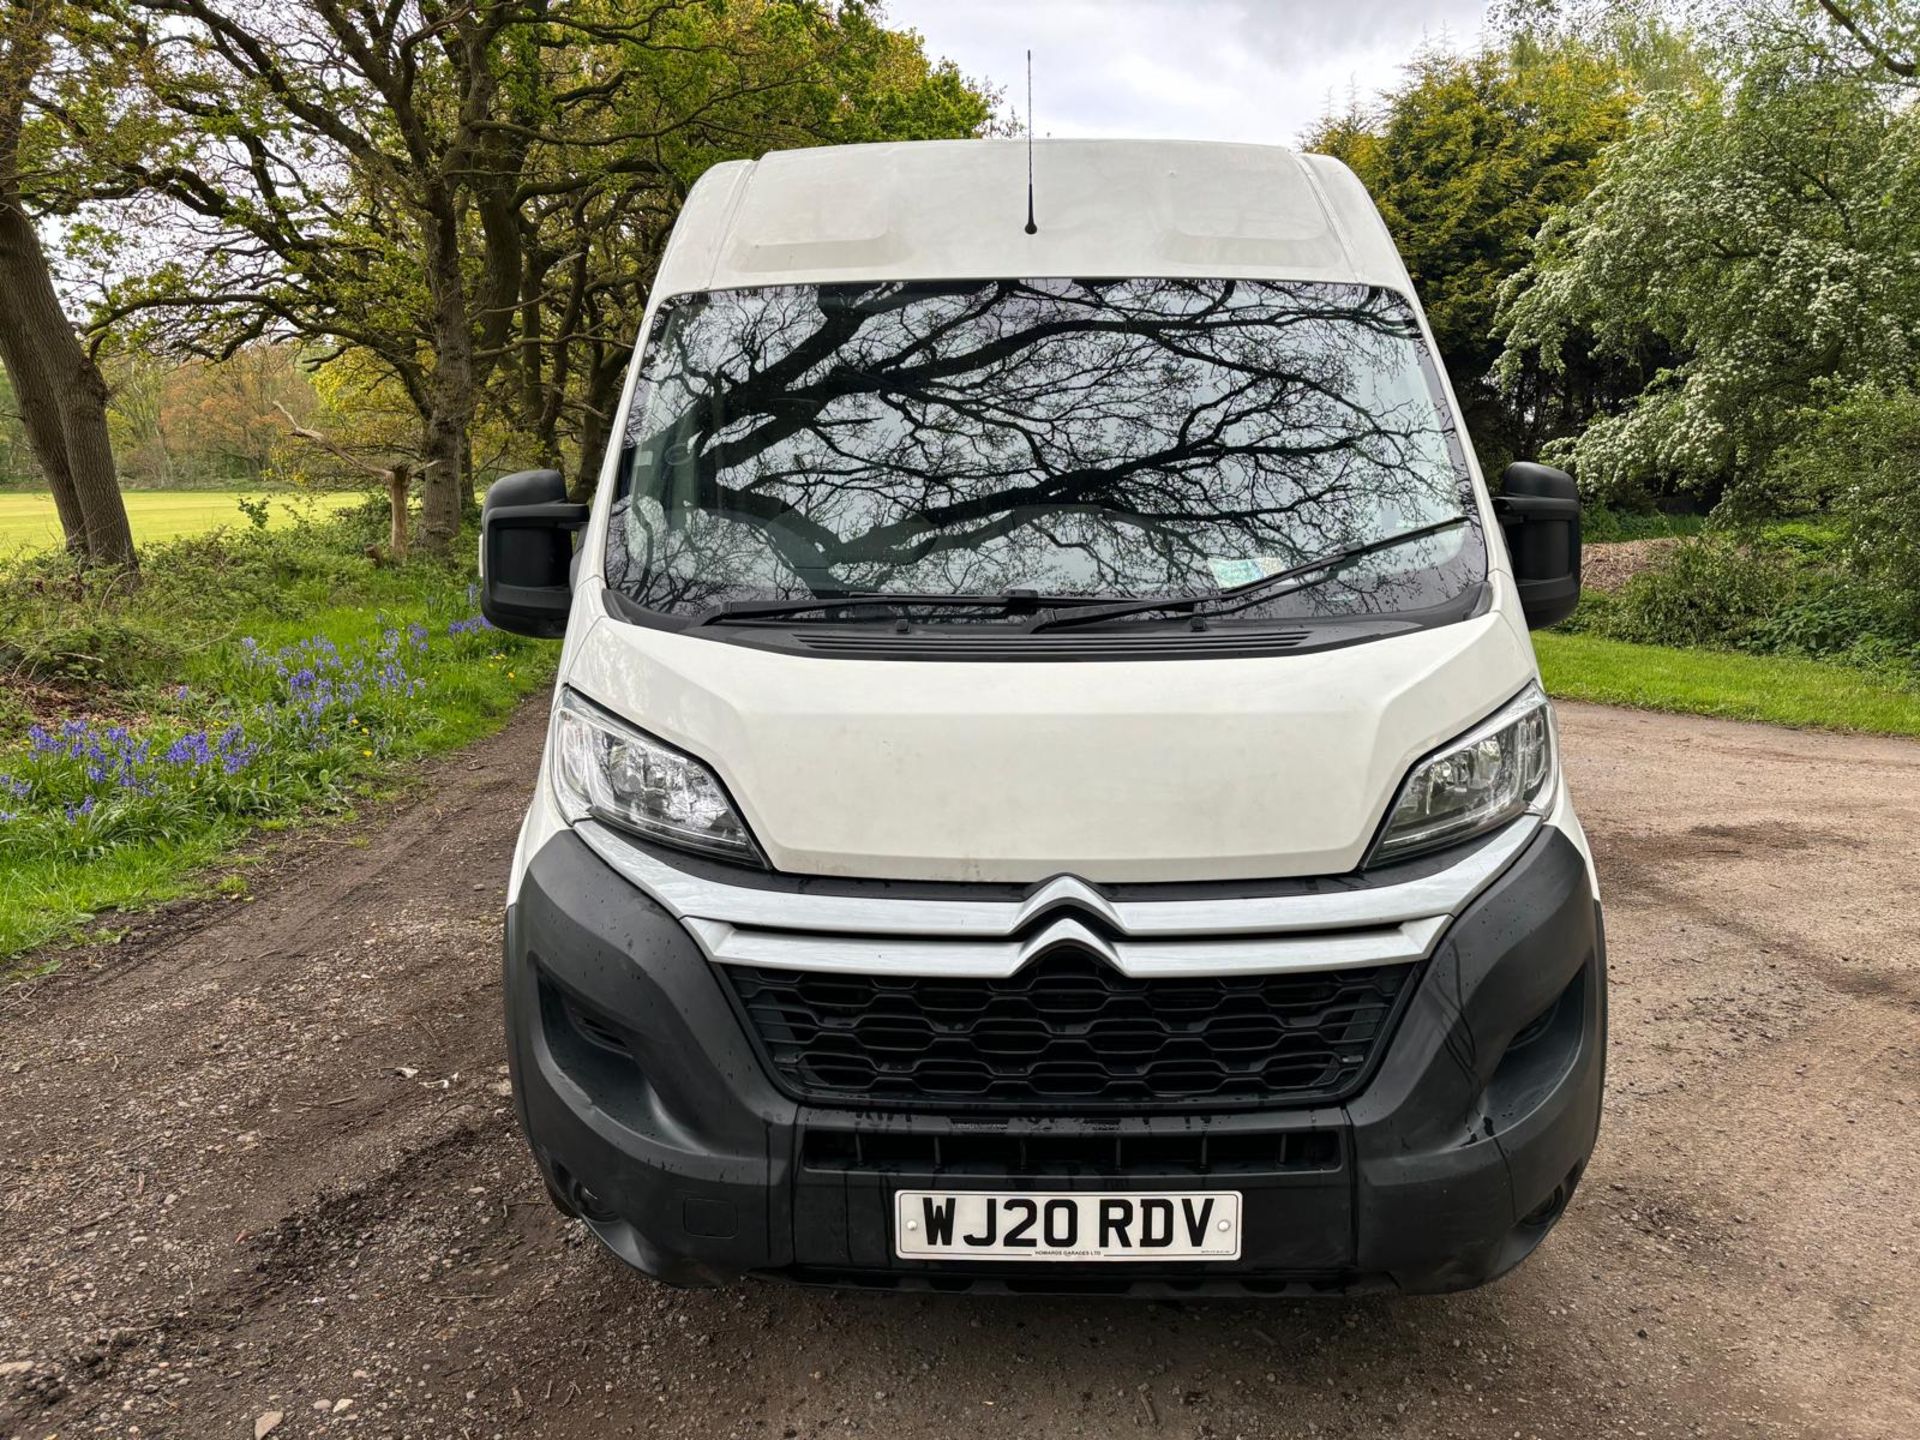 2020 20 CITROEN RELAY PANEL VAN - 2.2 6 SPEED - 109K MILES - AIR CON - EURO 6 - PLY LINED  - Image 5 of 12